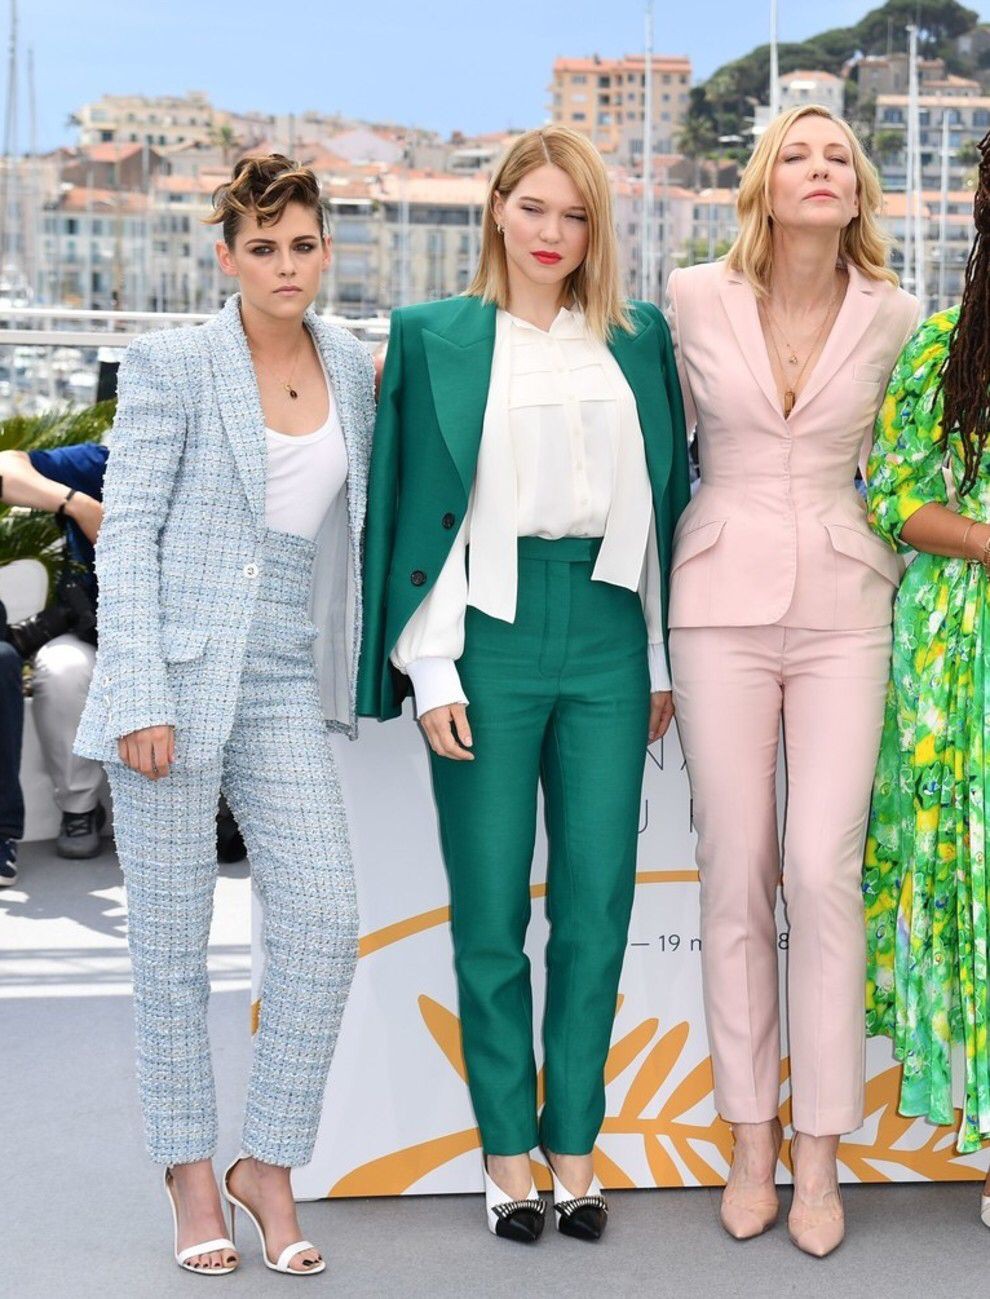 Check more of fashion model, 2018 Cannes Film Festival: Red Carpet Dresses,  Kristen Stewart,  Green Pant Outfits,  Cate Blanchett  